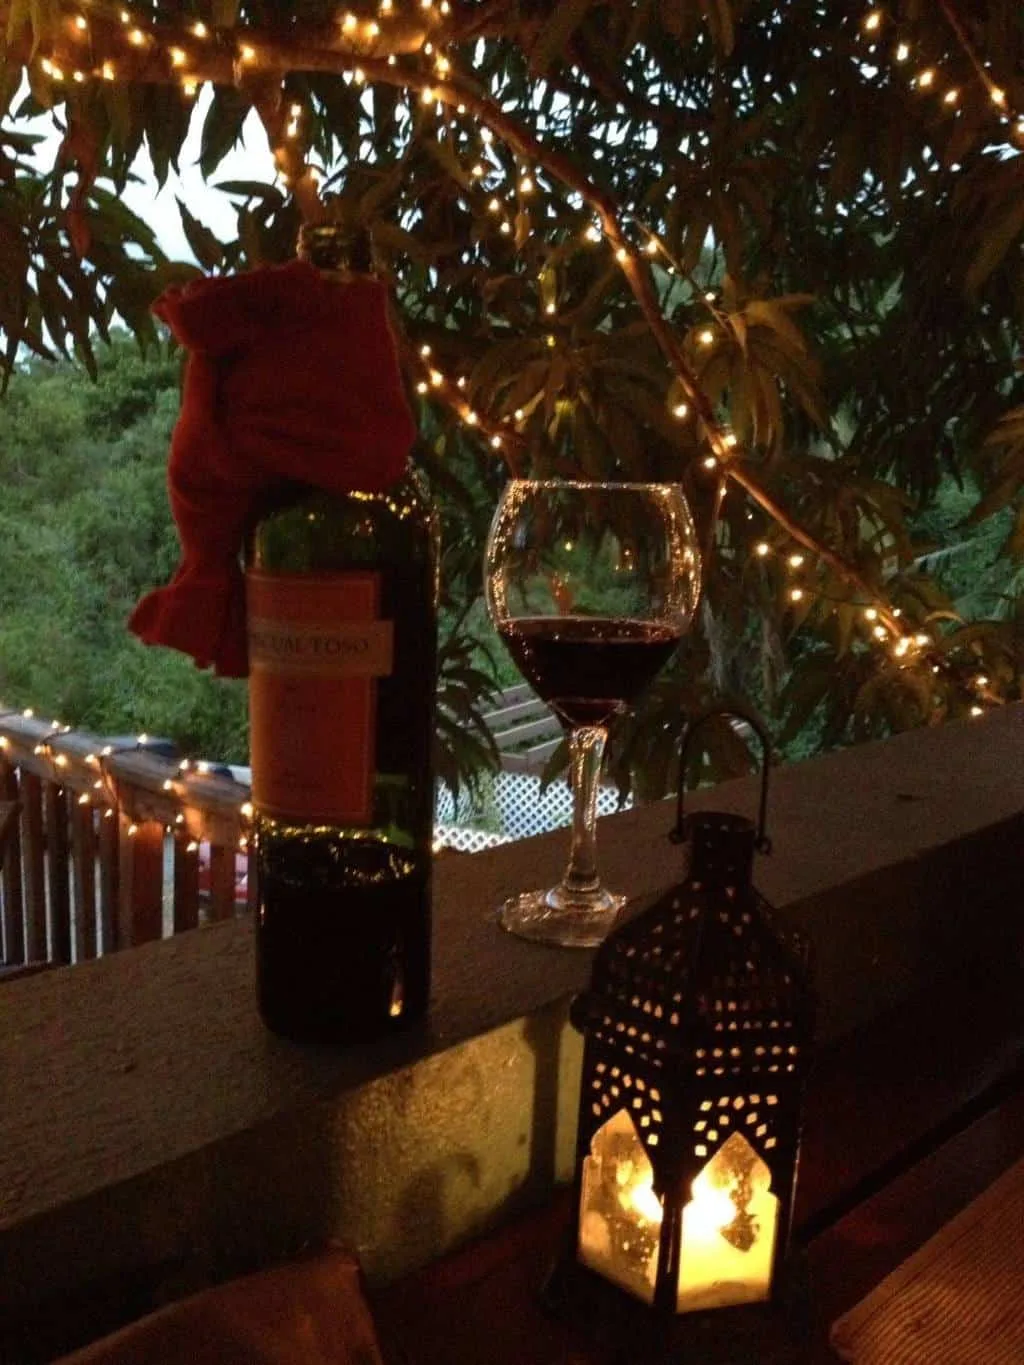 Bottle of wine on a candle lit table in a restaurant  